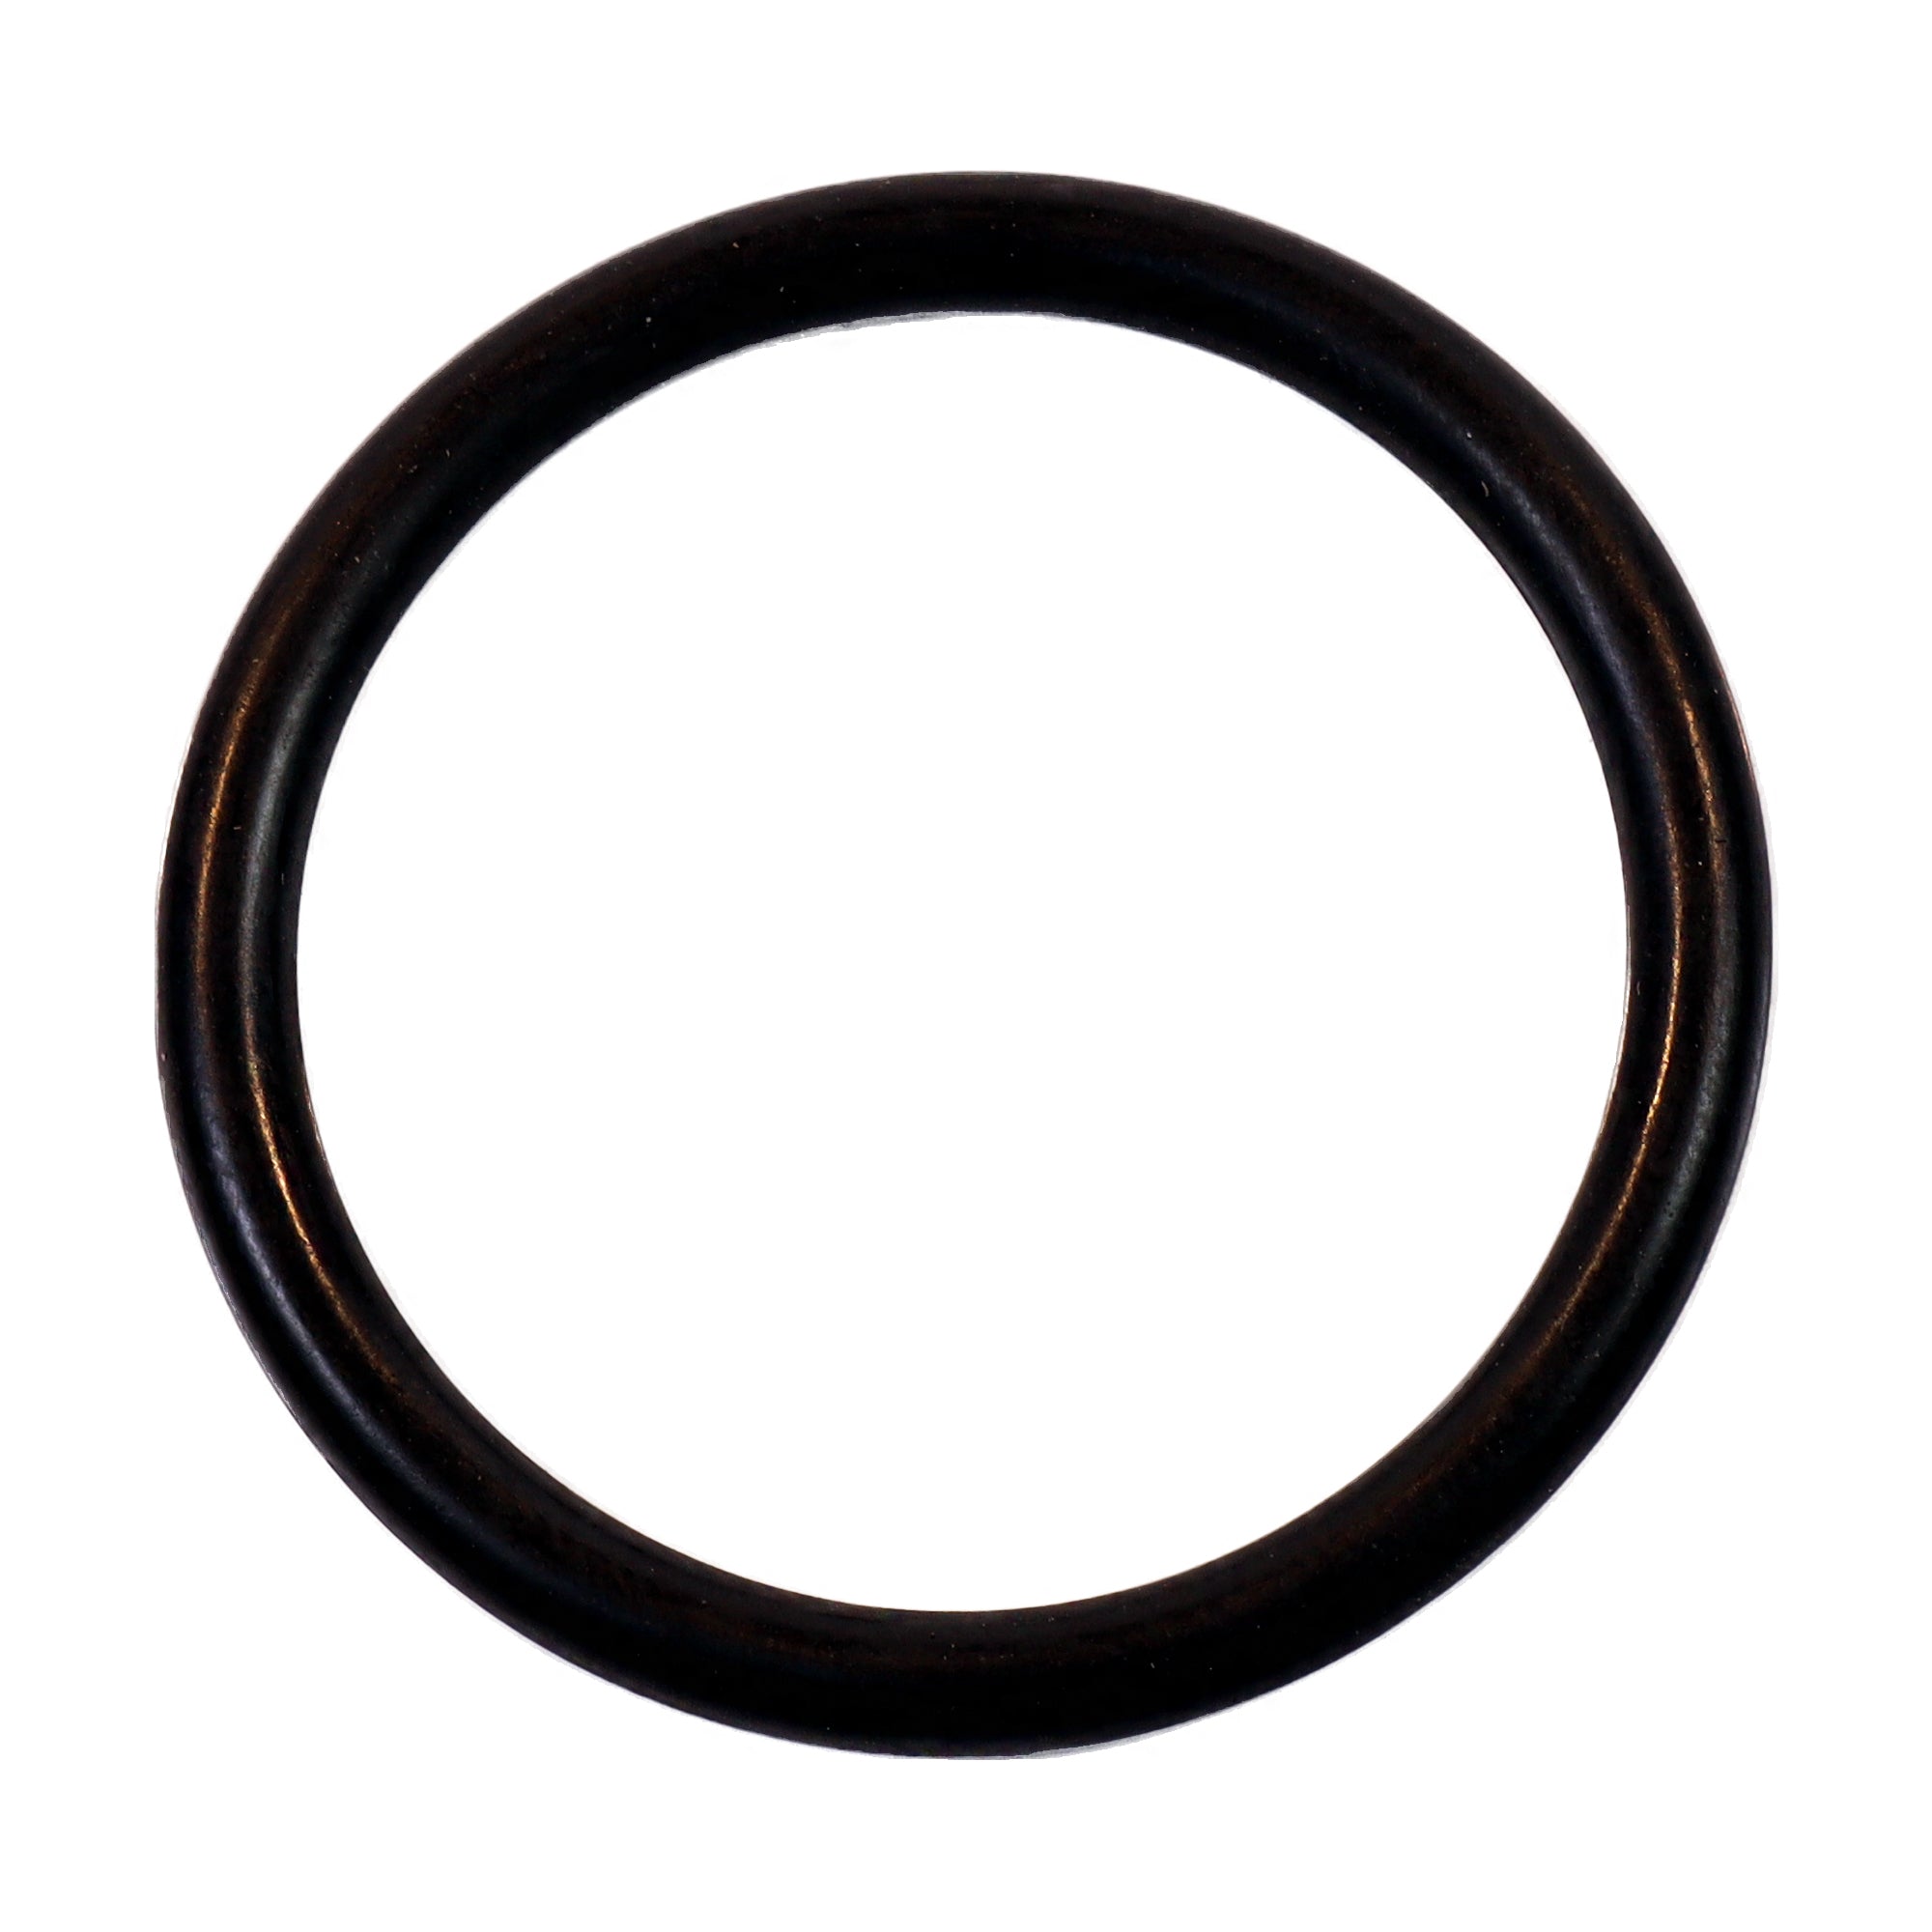 0707b Thin O-ring for 1107, 1106 and 1117 adapter